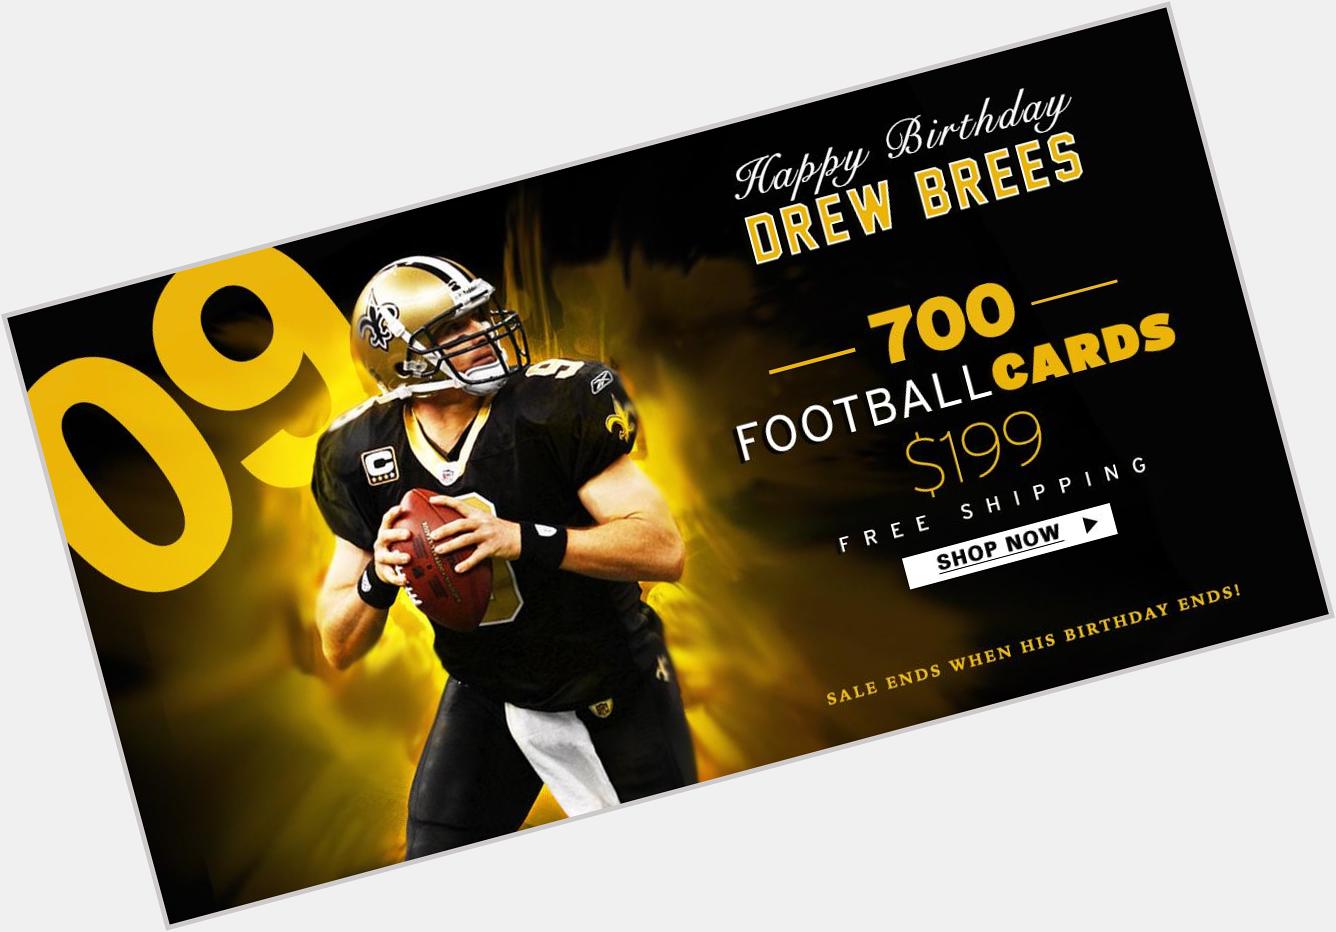 HAPPY BDAY! 700 DREW BREES FOOTBALL CARDS FOR $199 + FREE SHIPPING! SHOP HERE: 